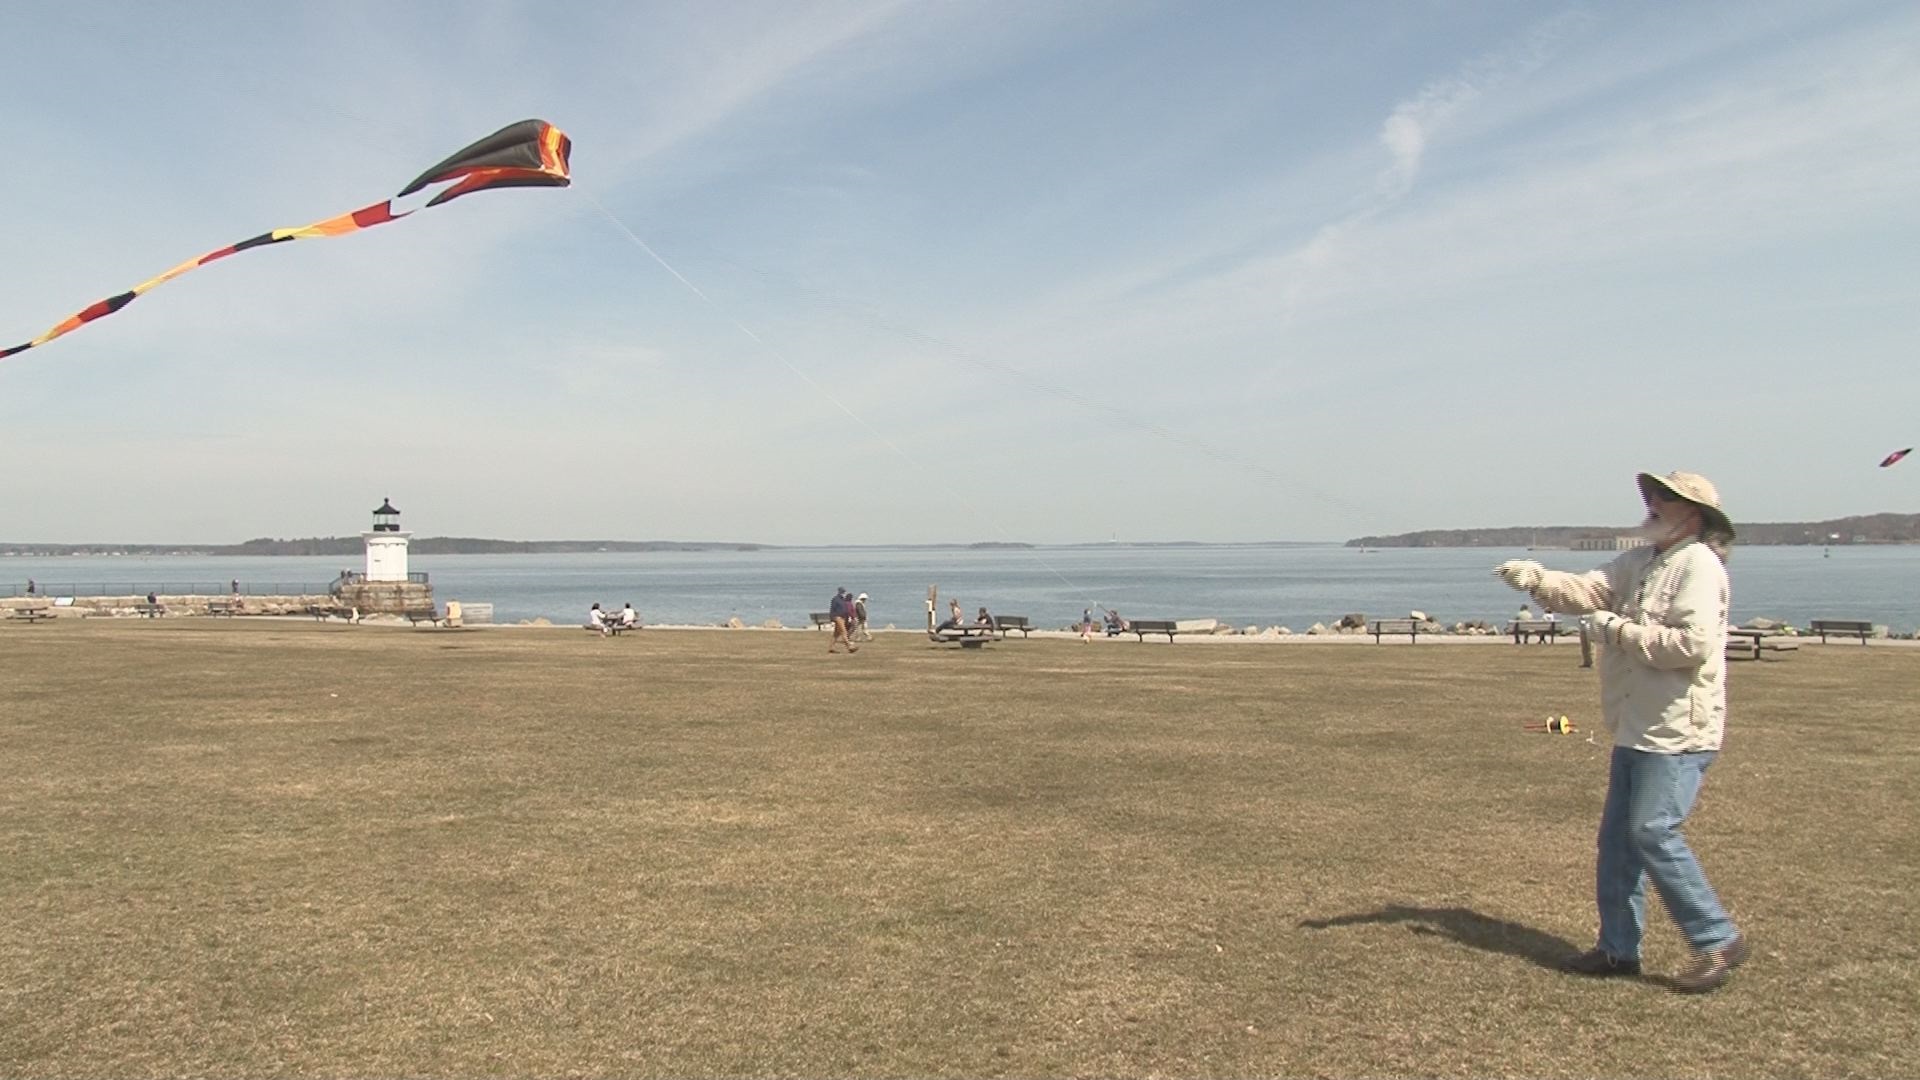 The fun of kite flying and crafting | WCSH6.com - WCSH-TV